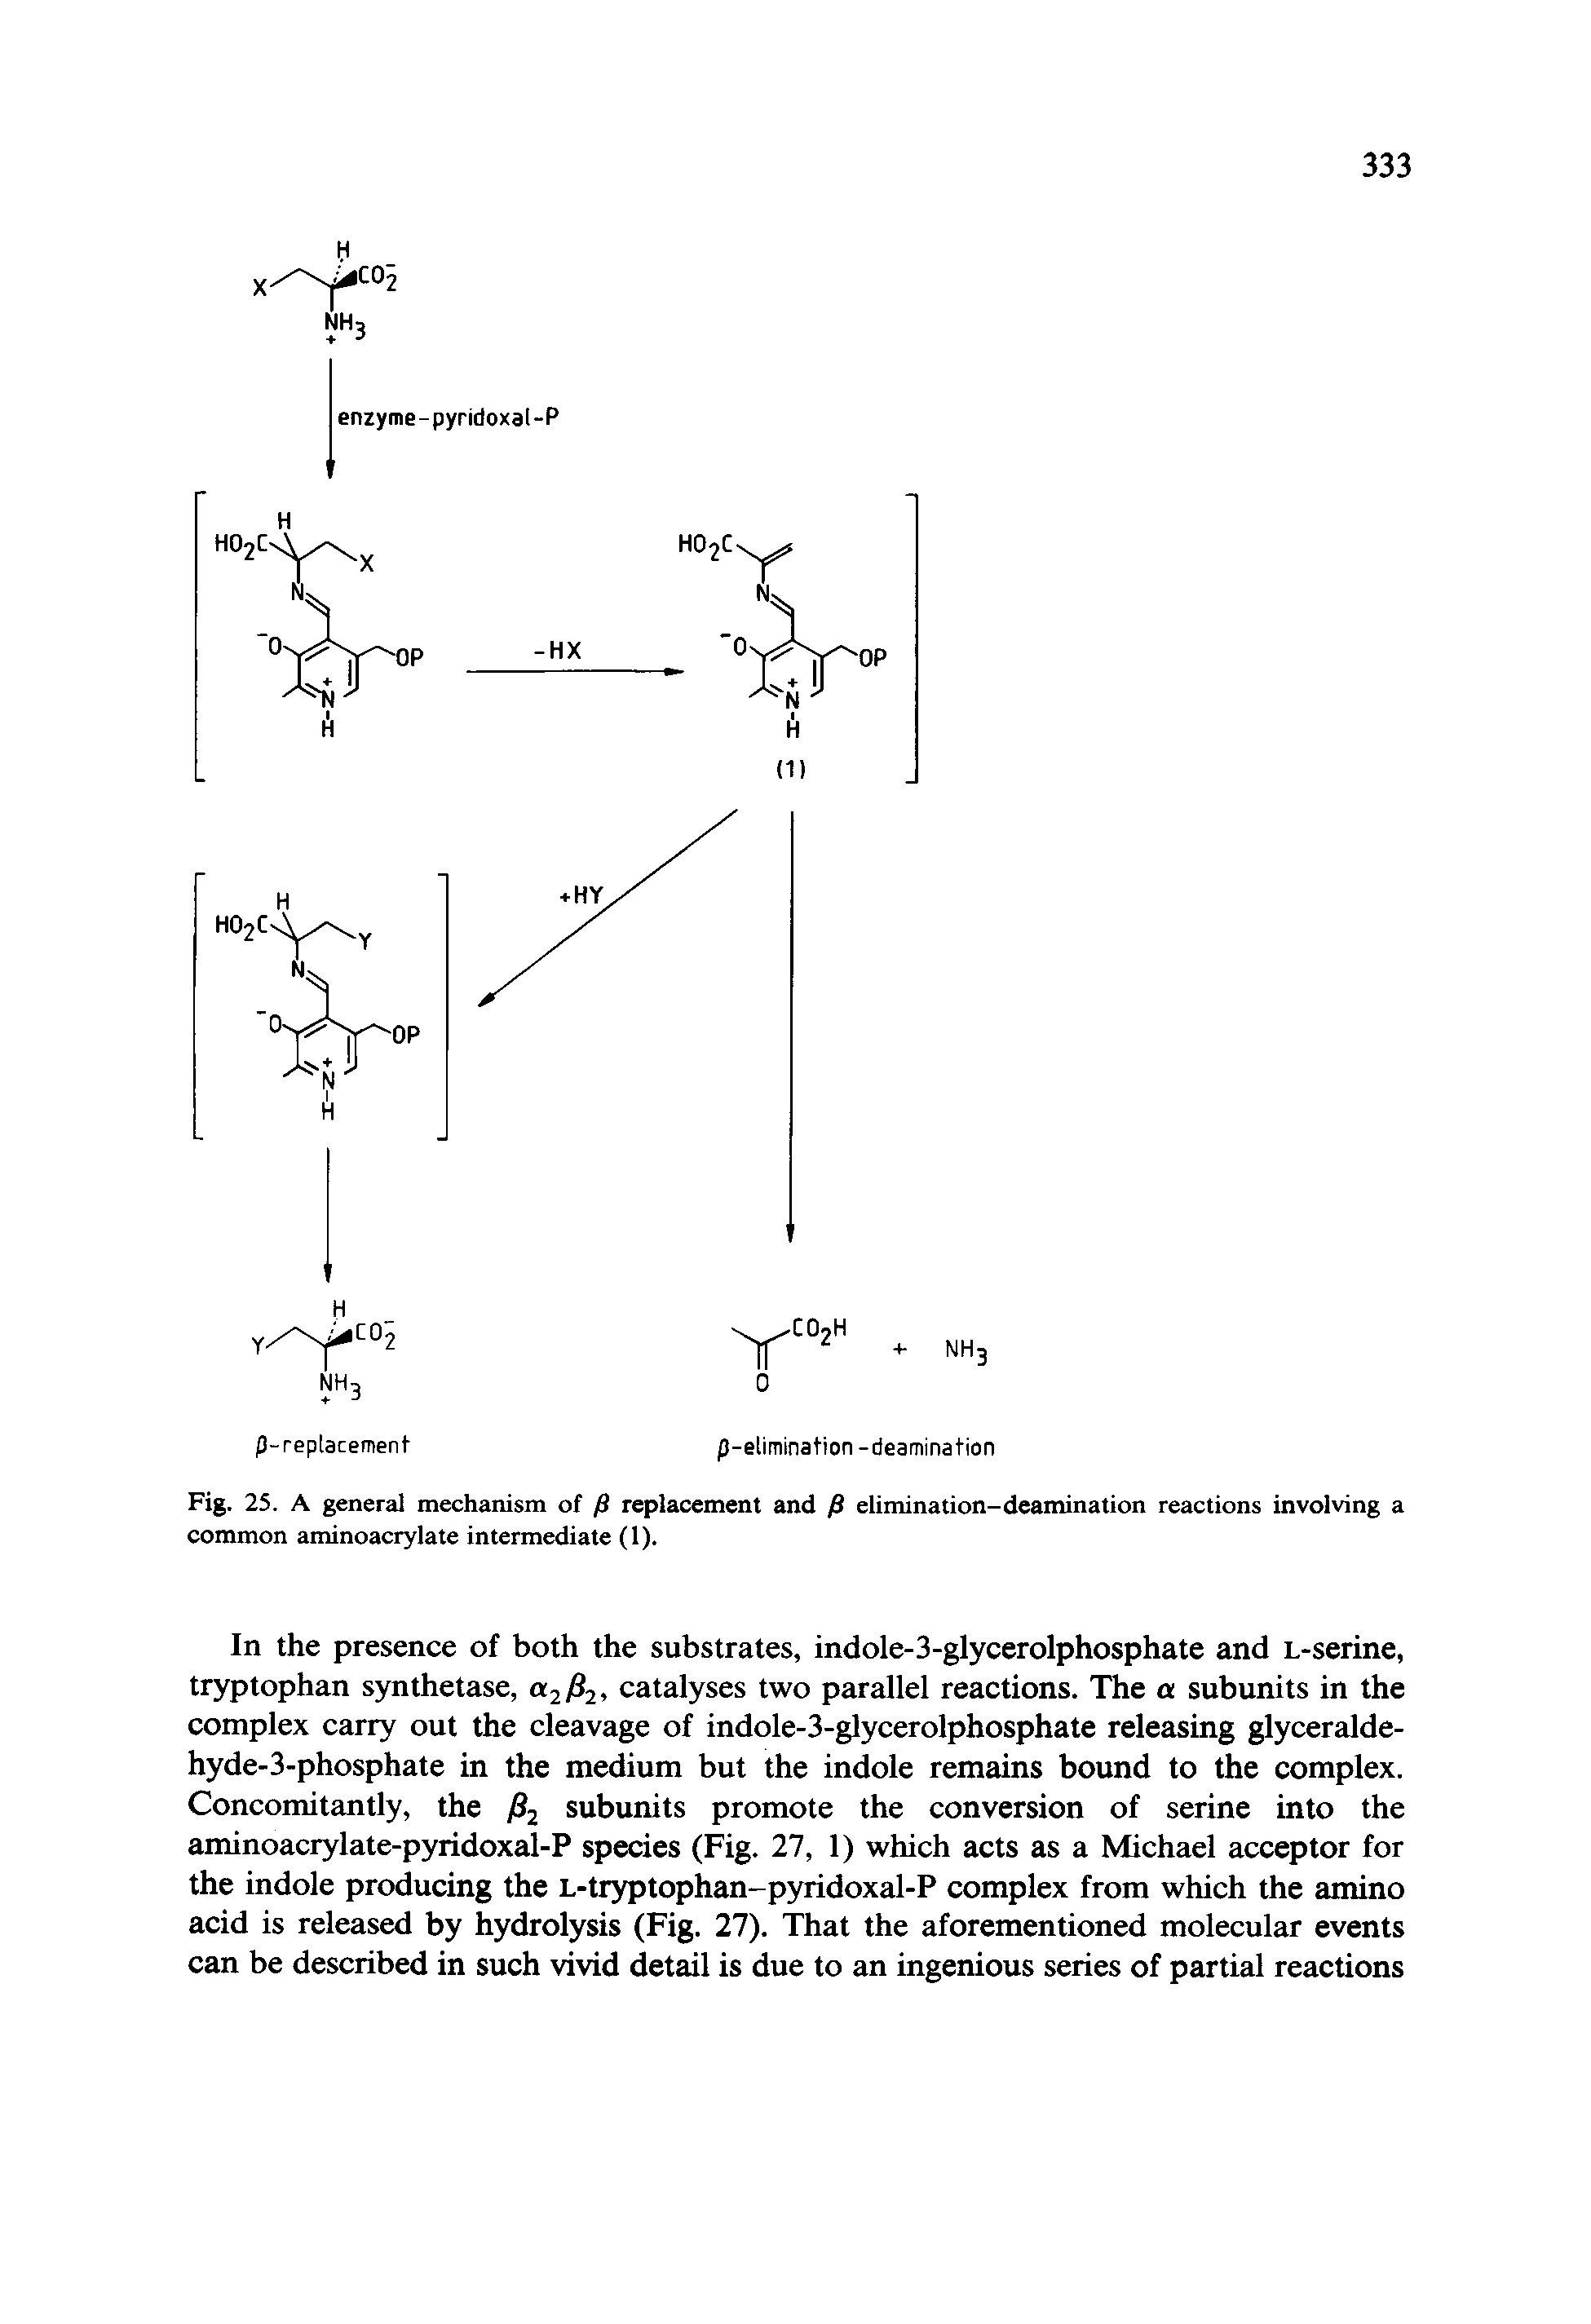 Fig. 25. A general mechanism of /8 replacement and P elimination-deamination reactions involving a common aminoacrylate intermediate (1).